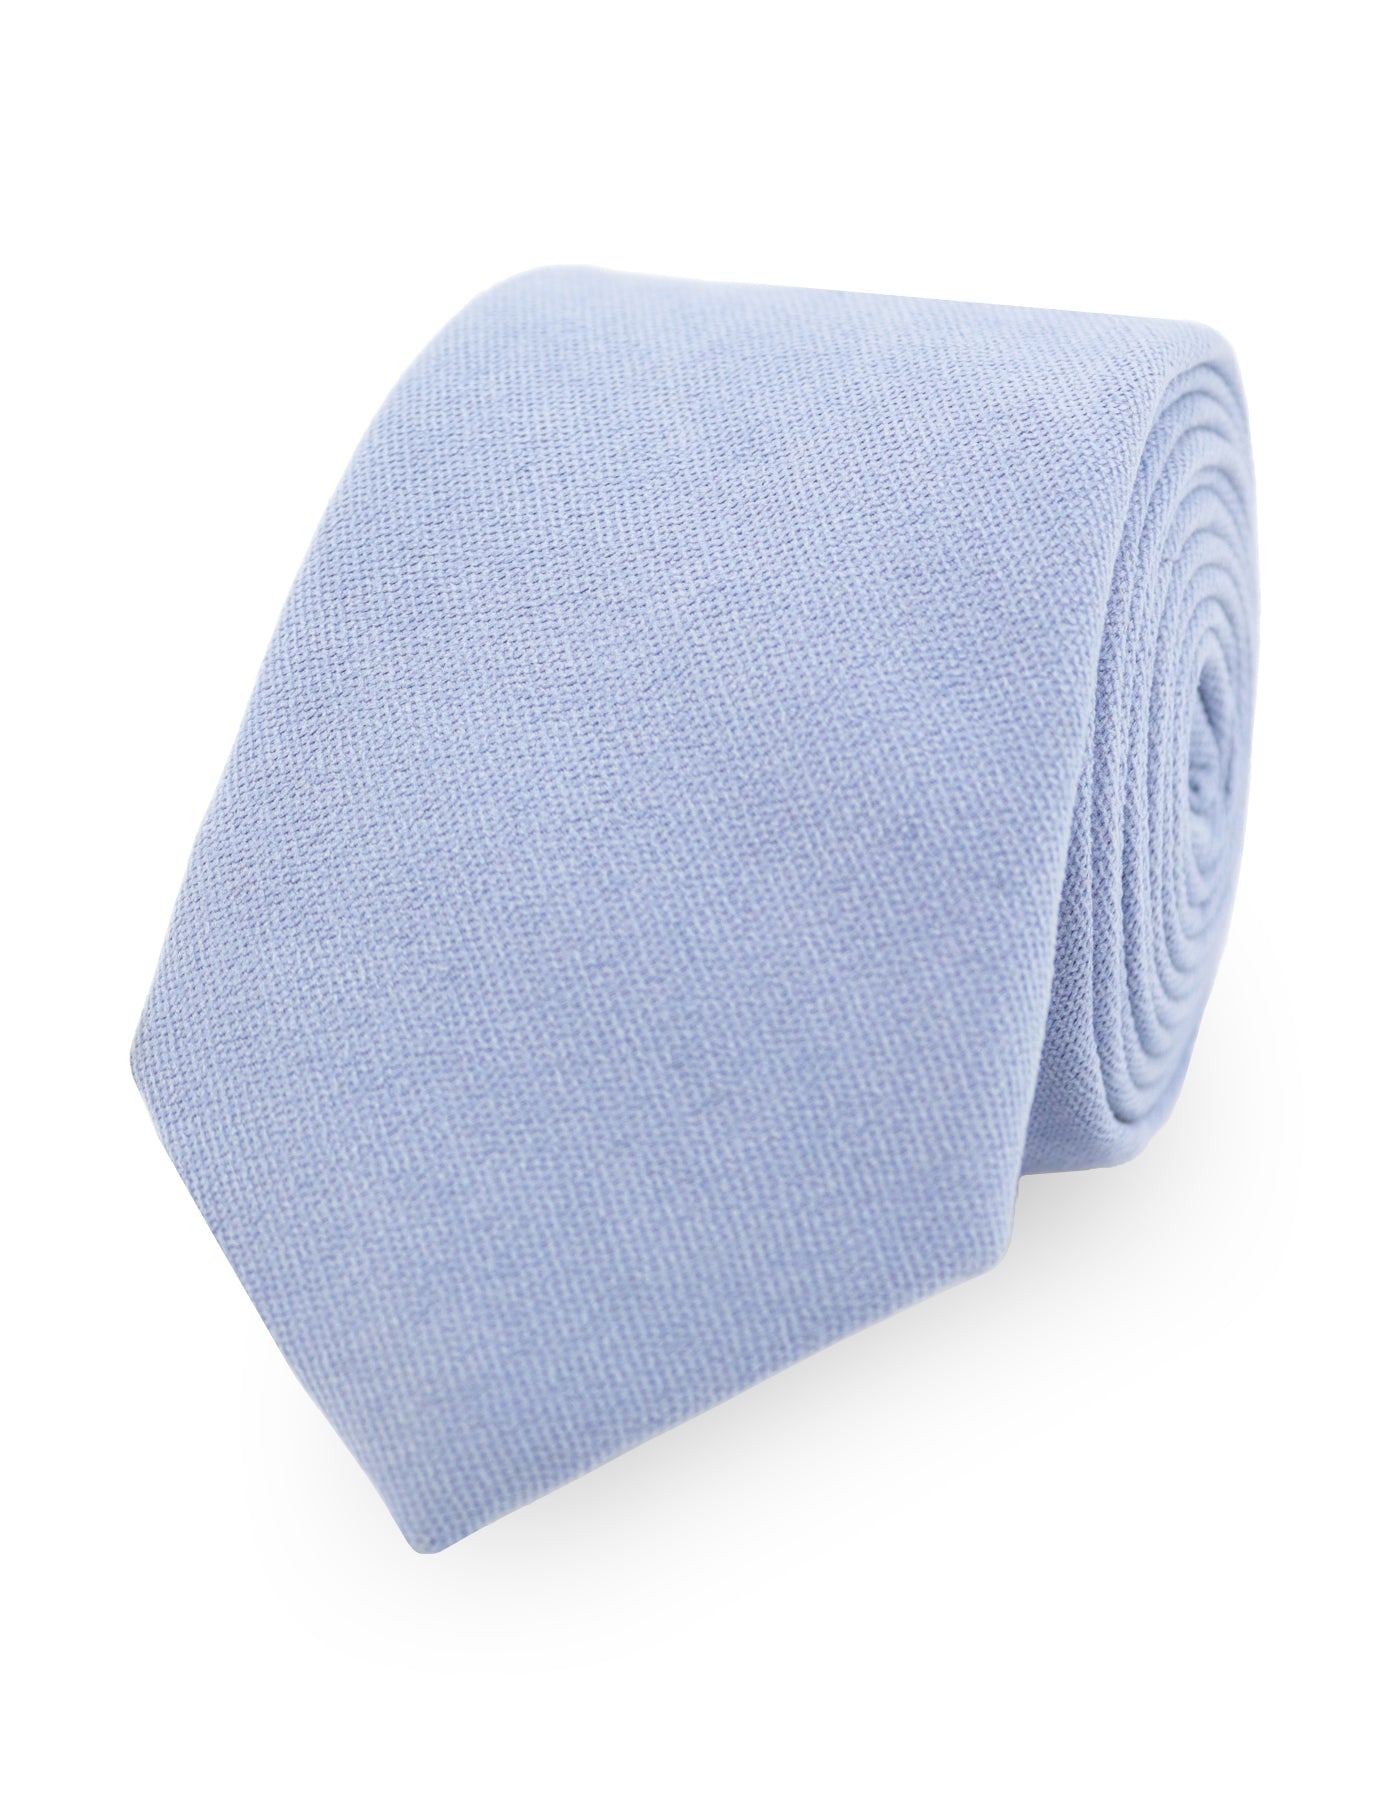 100% Brushed Cotton Suede Tie - Blue – THE GENTS LAB